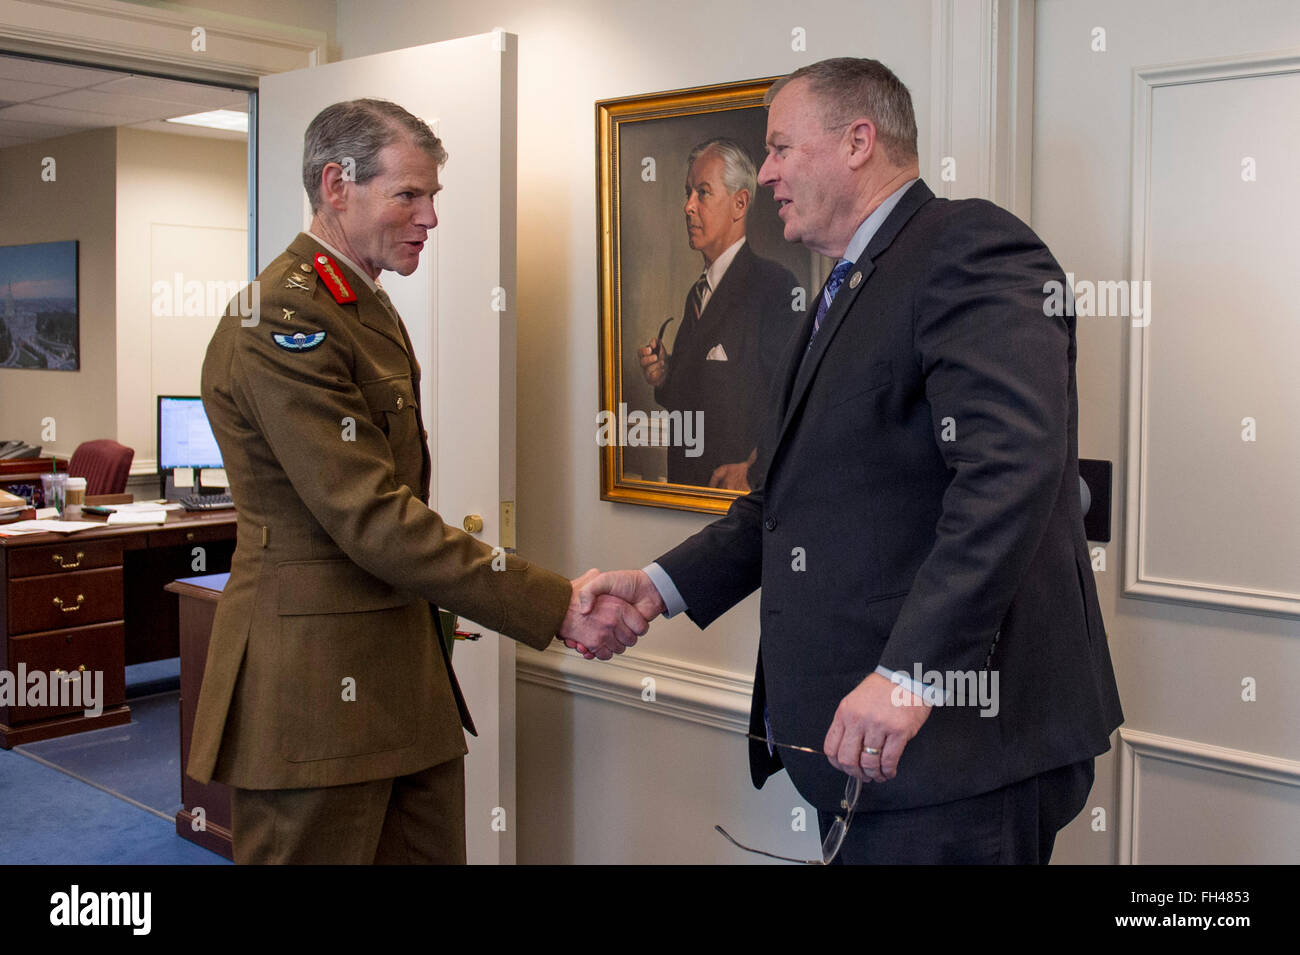 Deputy Secretary of Defense Bob Work greets Deputy Supreme Allied Commander Europe General Sir Adrian Bradshaw at the Pentagon, Feb. 22, 2016. The two leaders met to discuss matters of mutual importance. Stock Photo